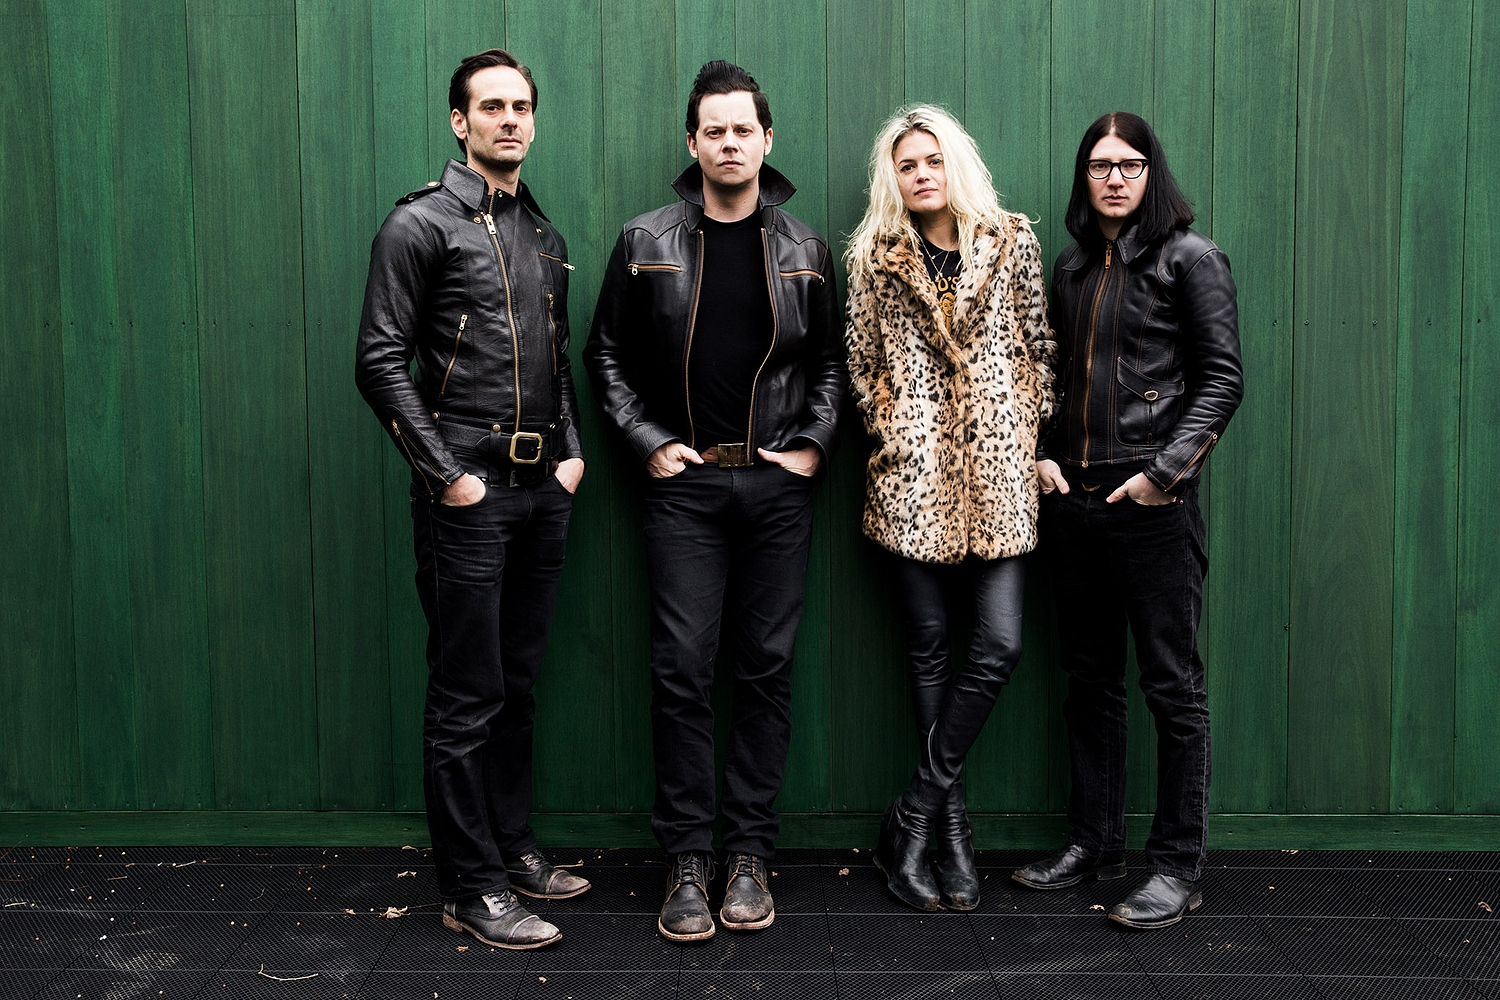 The Dead Weather perform 'I Feel Love (Every Million Miles)' on The Late Show